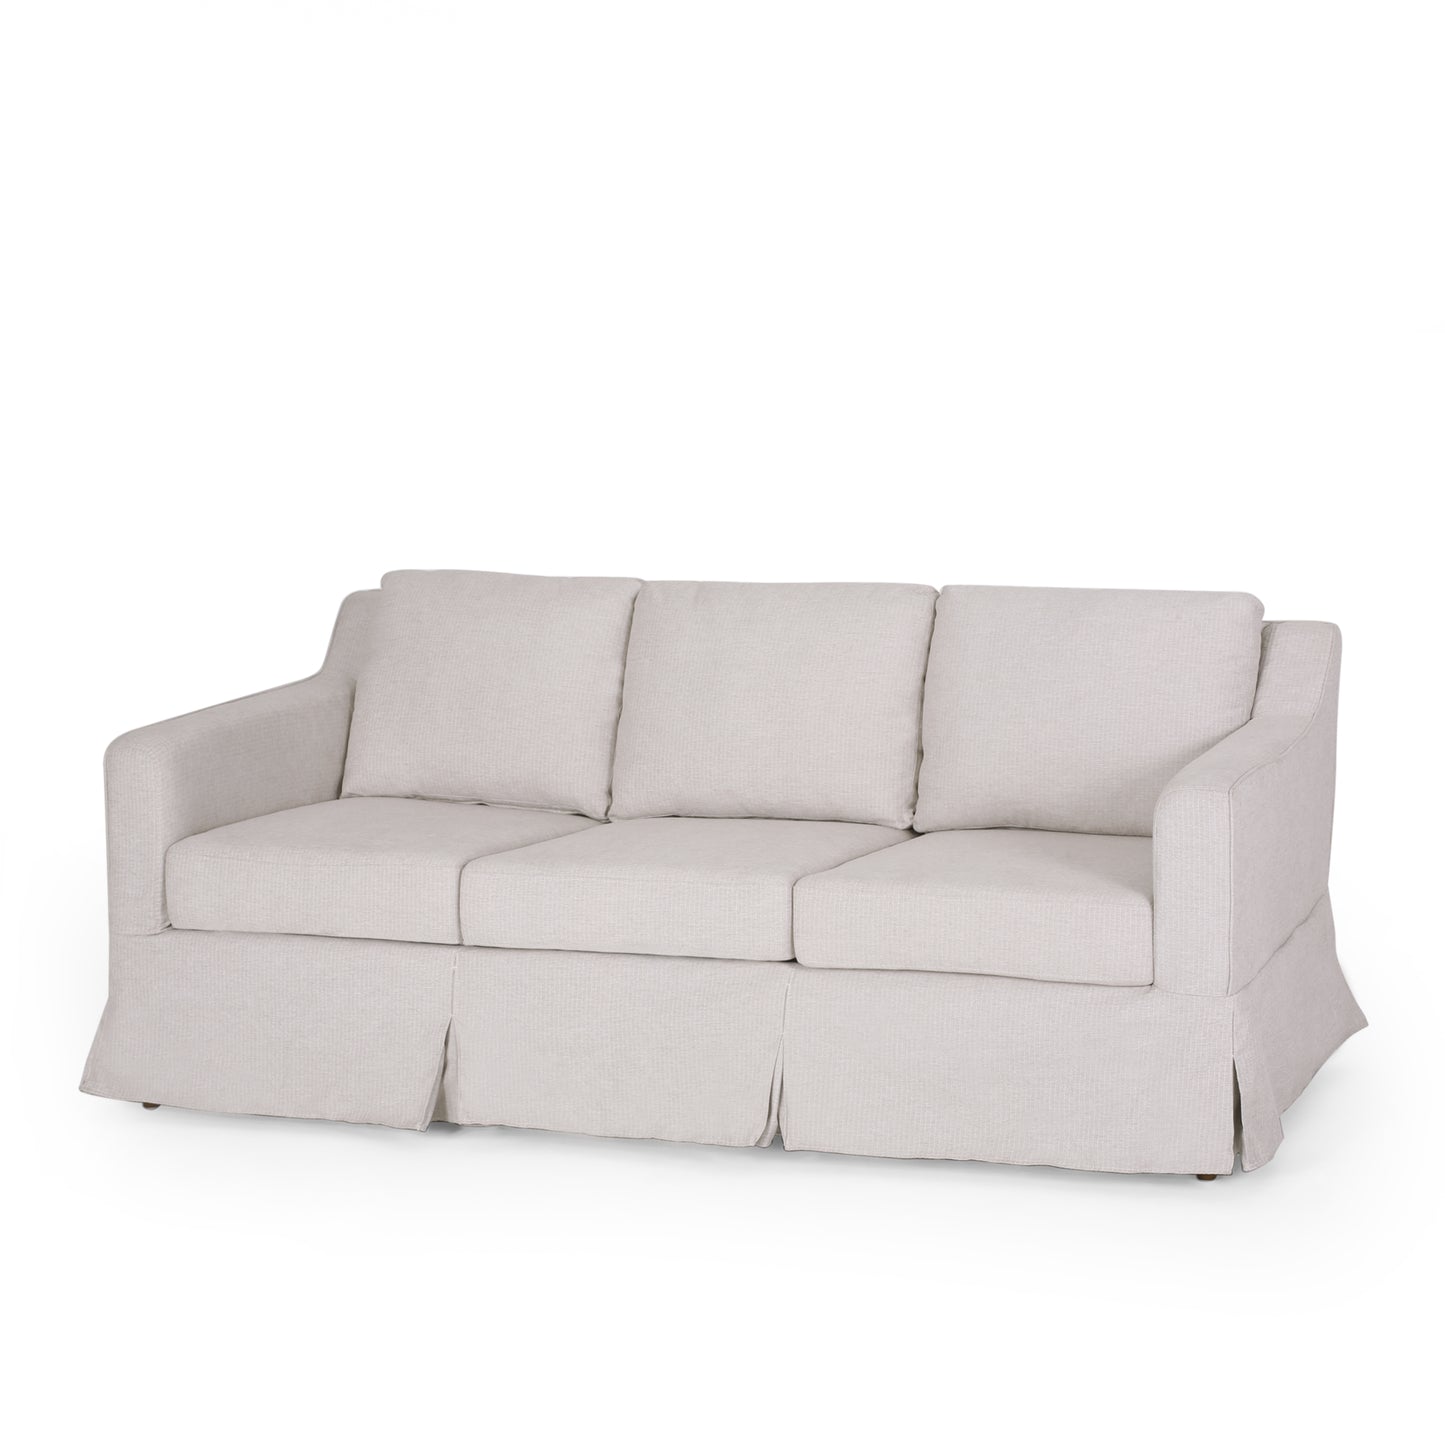 Bainville Contemporary Fabric 3 Seater Sofa with Skirt